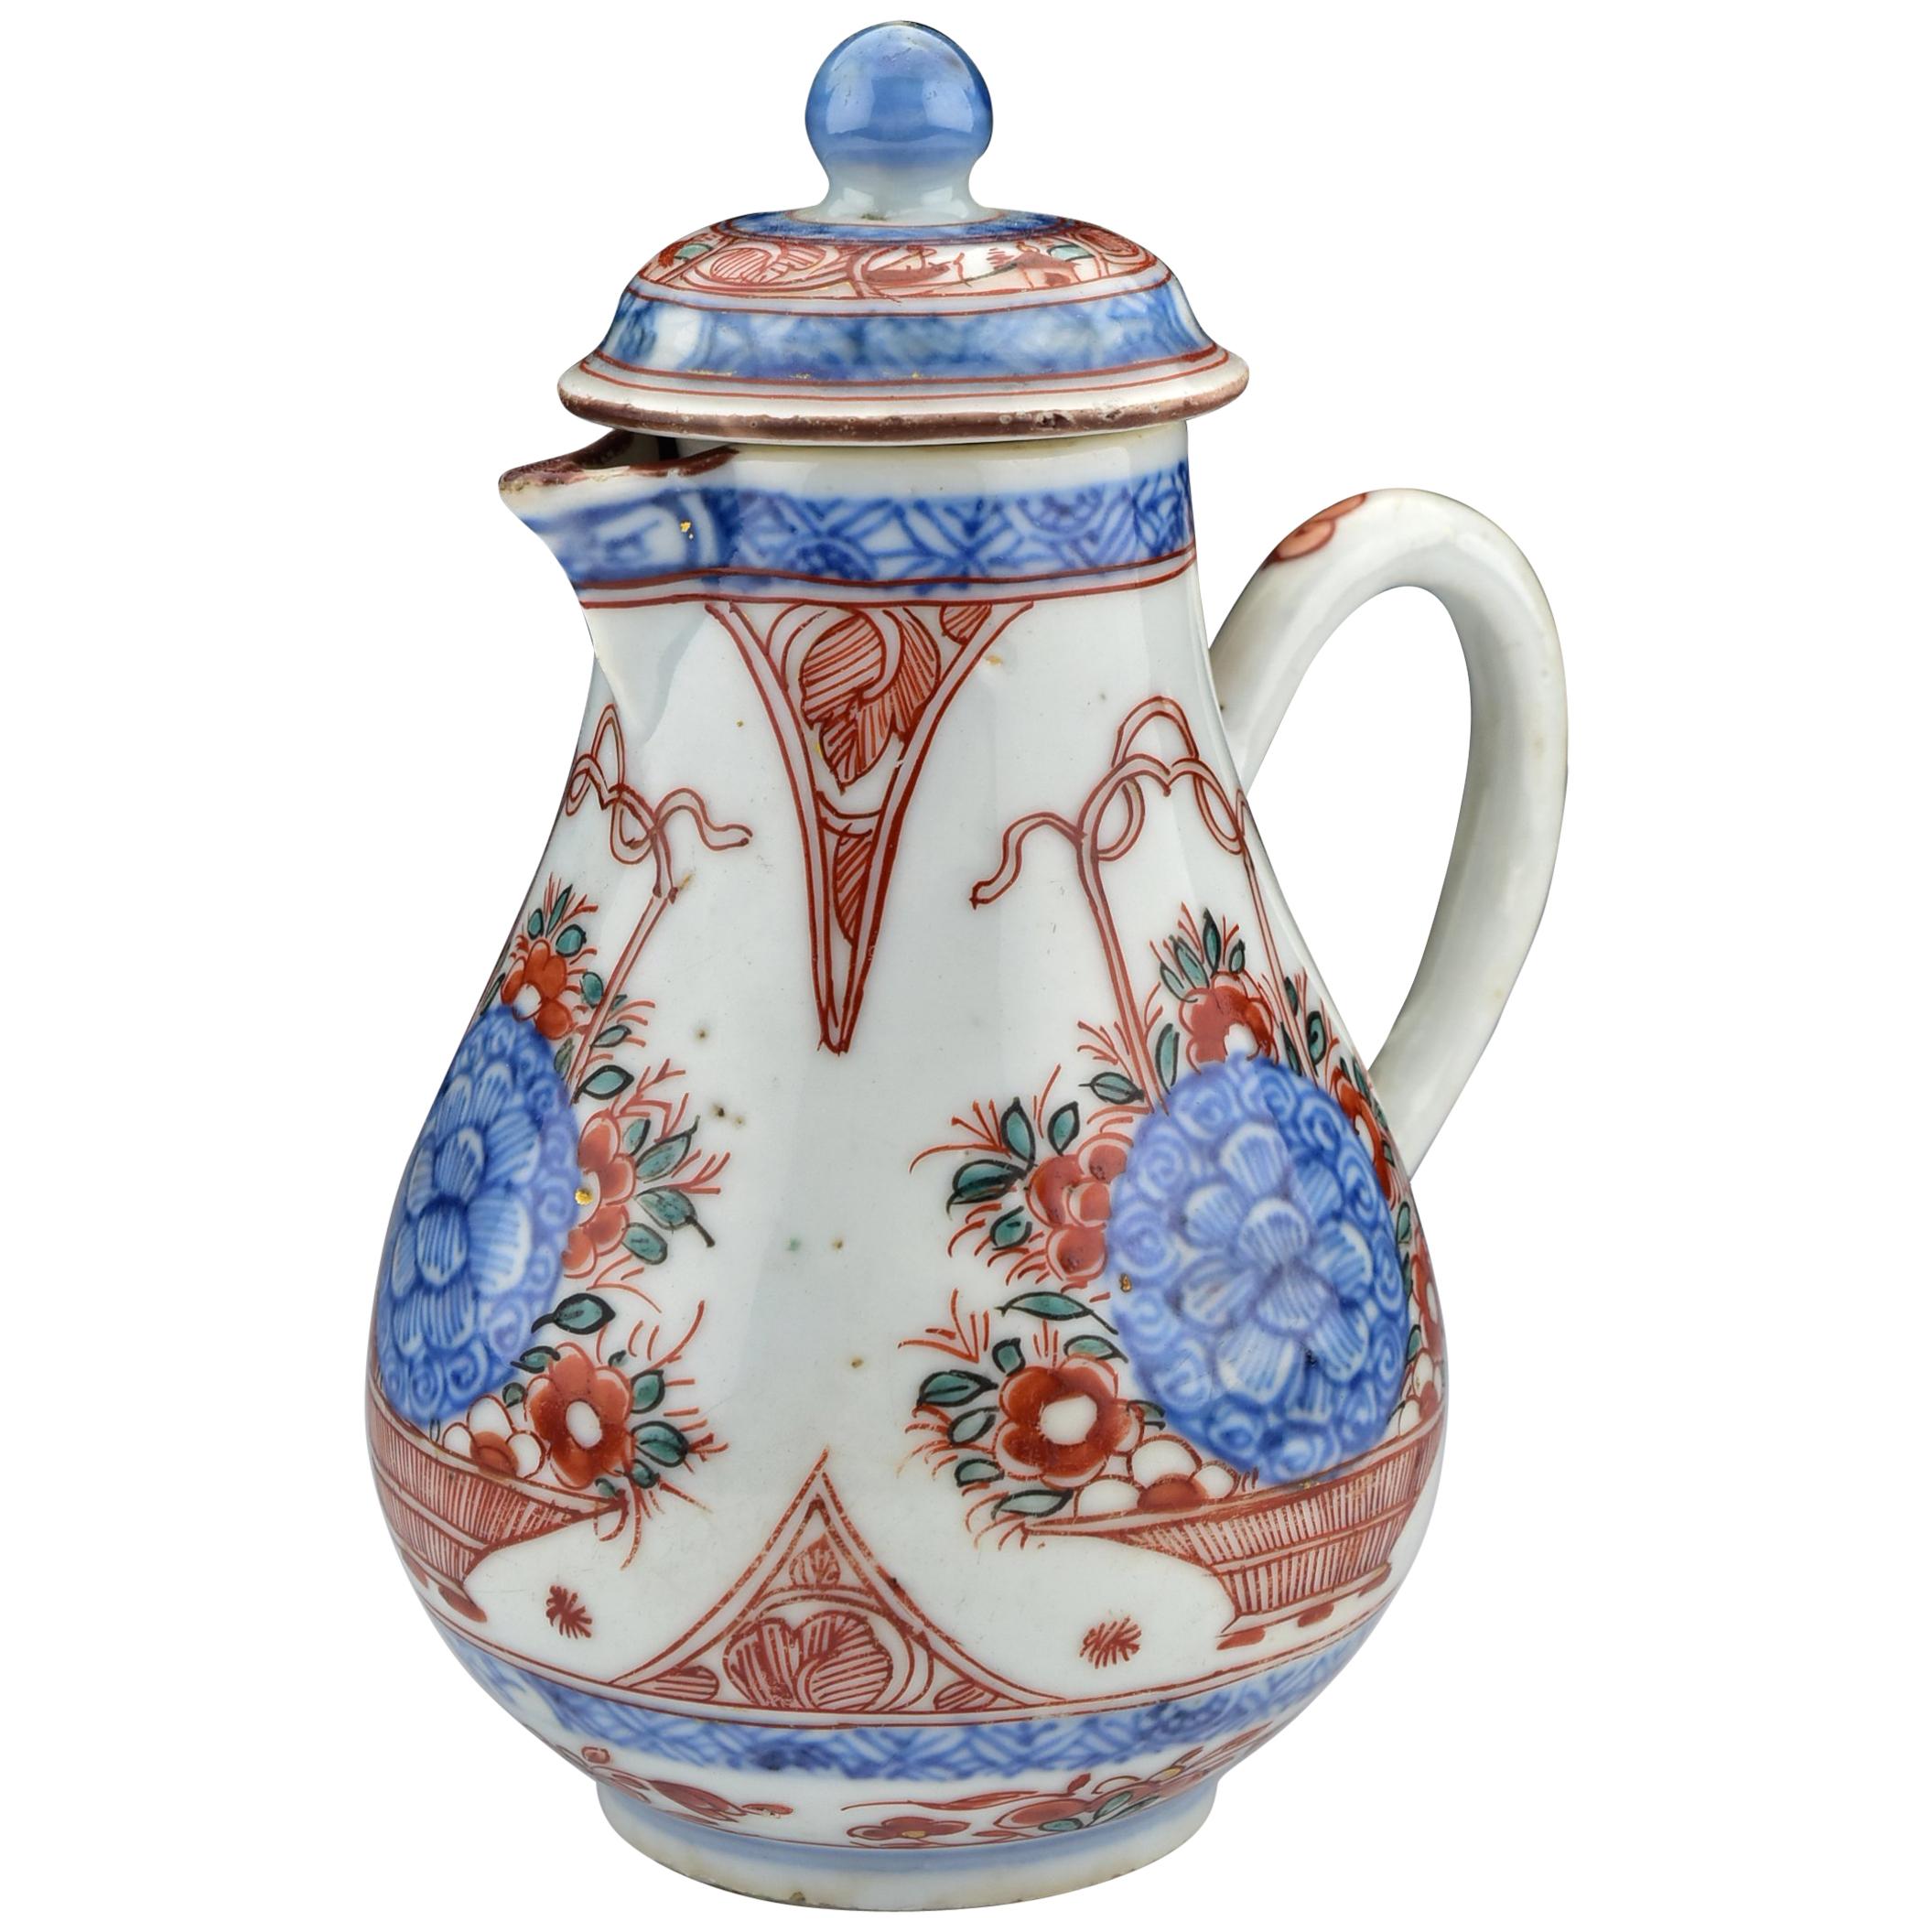 18th Century Chinese Export Porcelain Covered Cream Jug